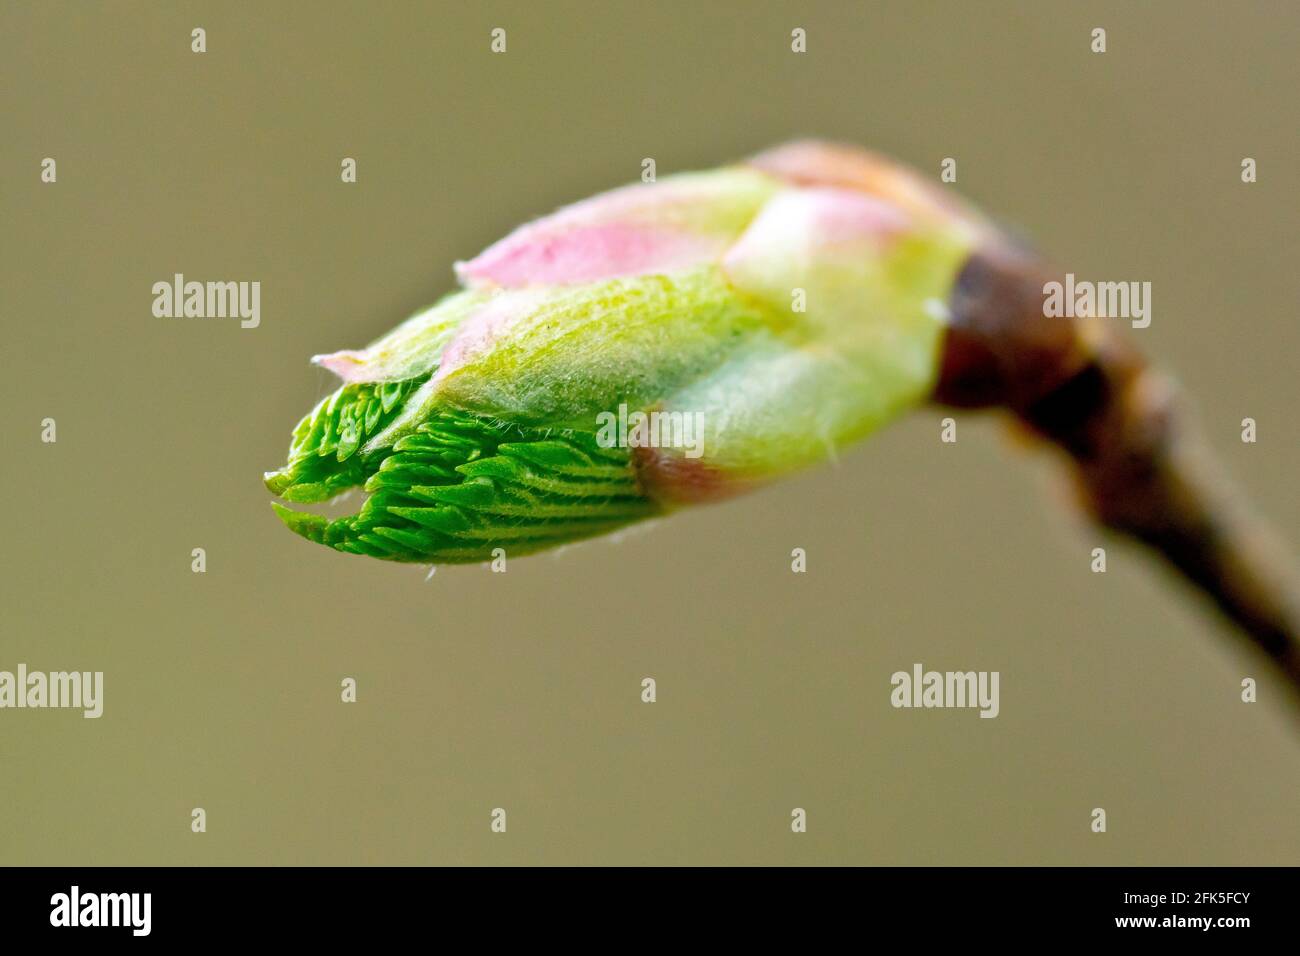 Wych Elm (ulmus glabra), close up of a new leaf emerging from the bud at the end of a branch. Stock Photo